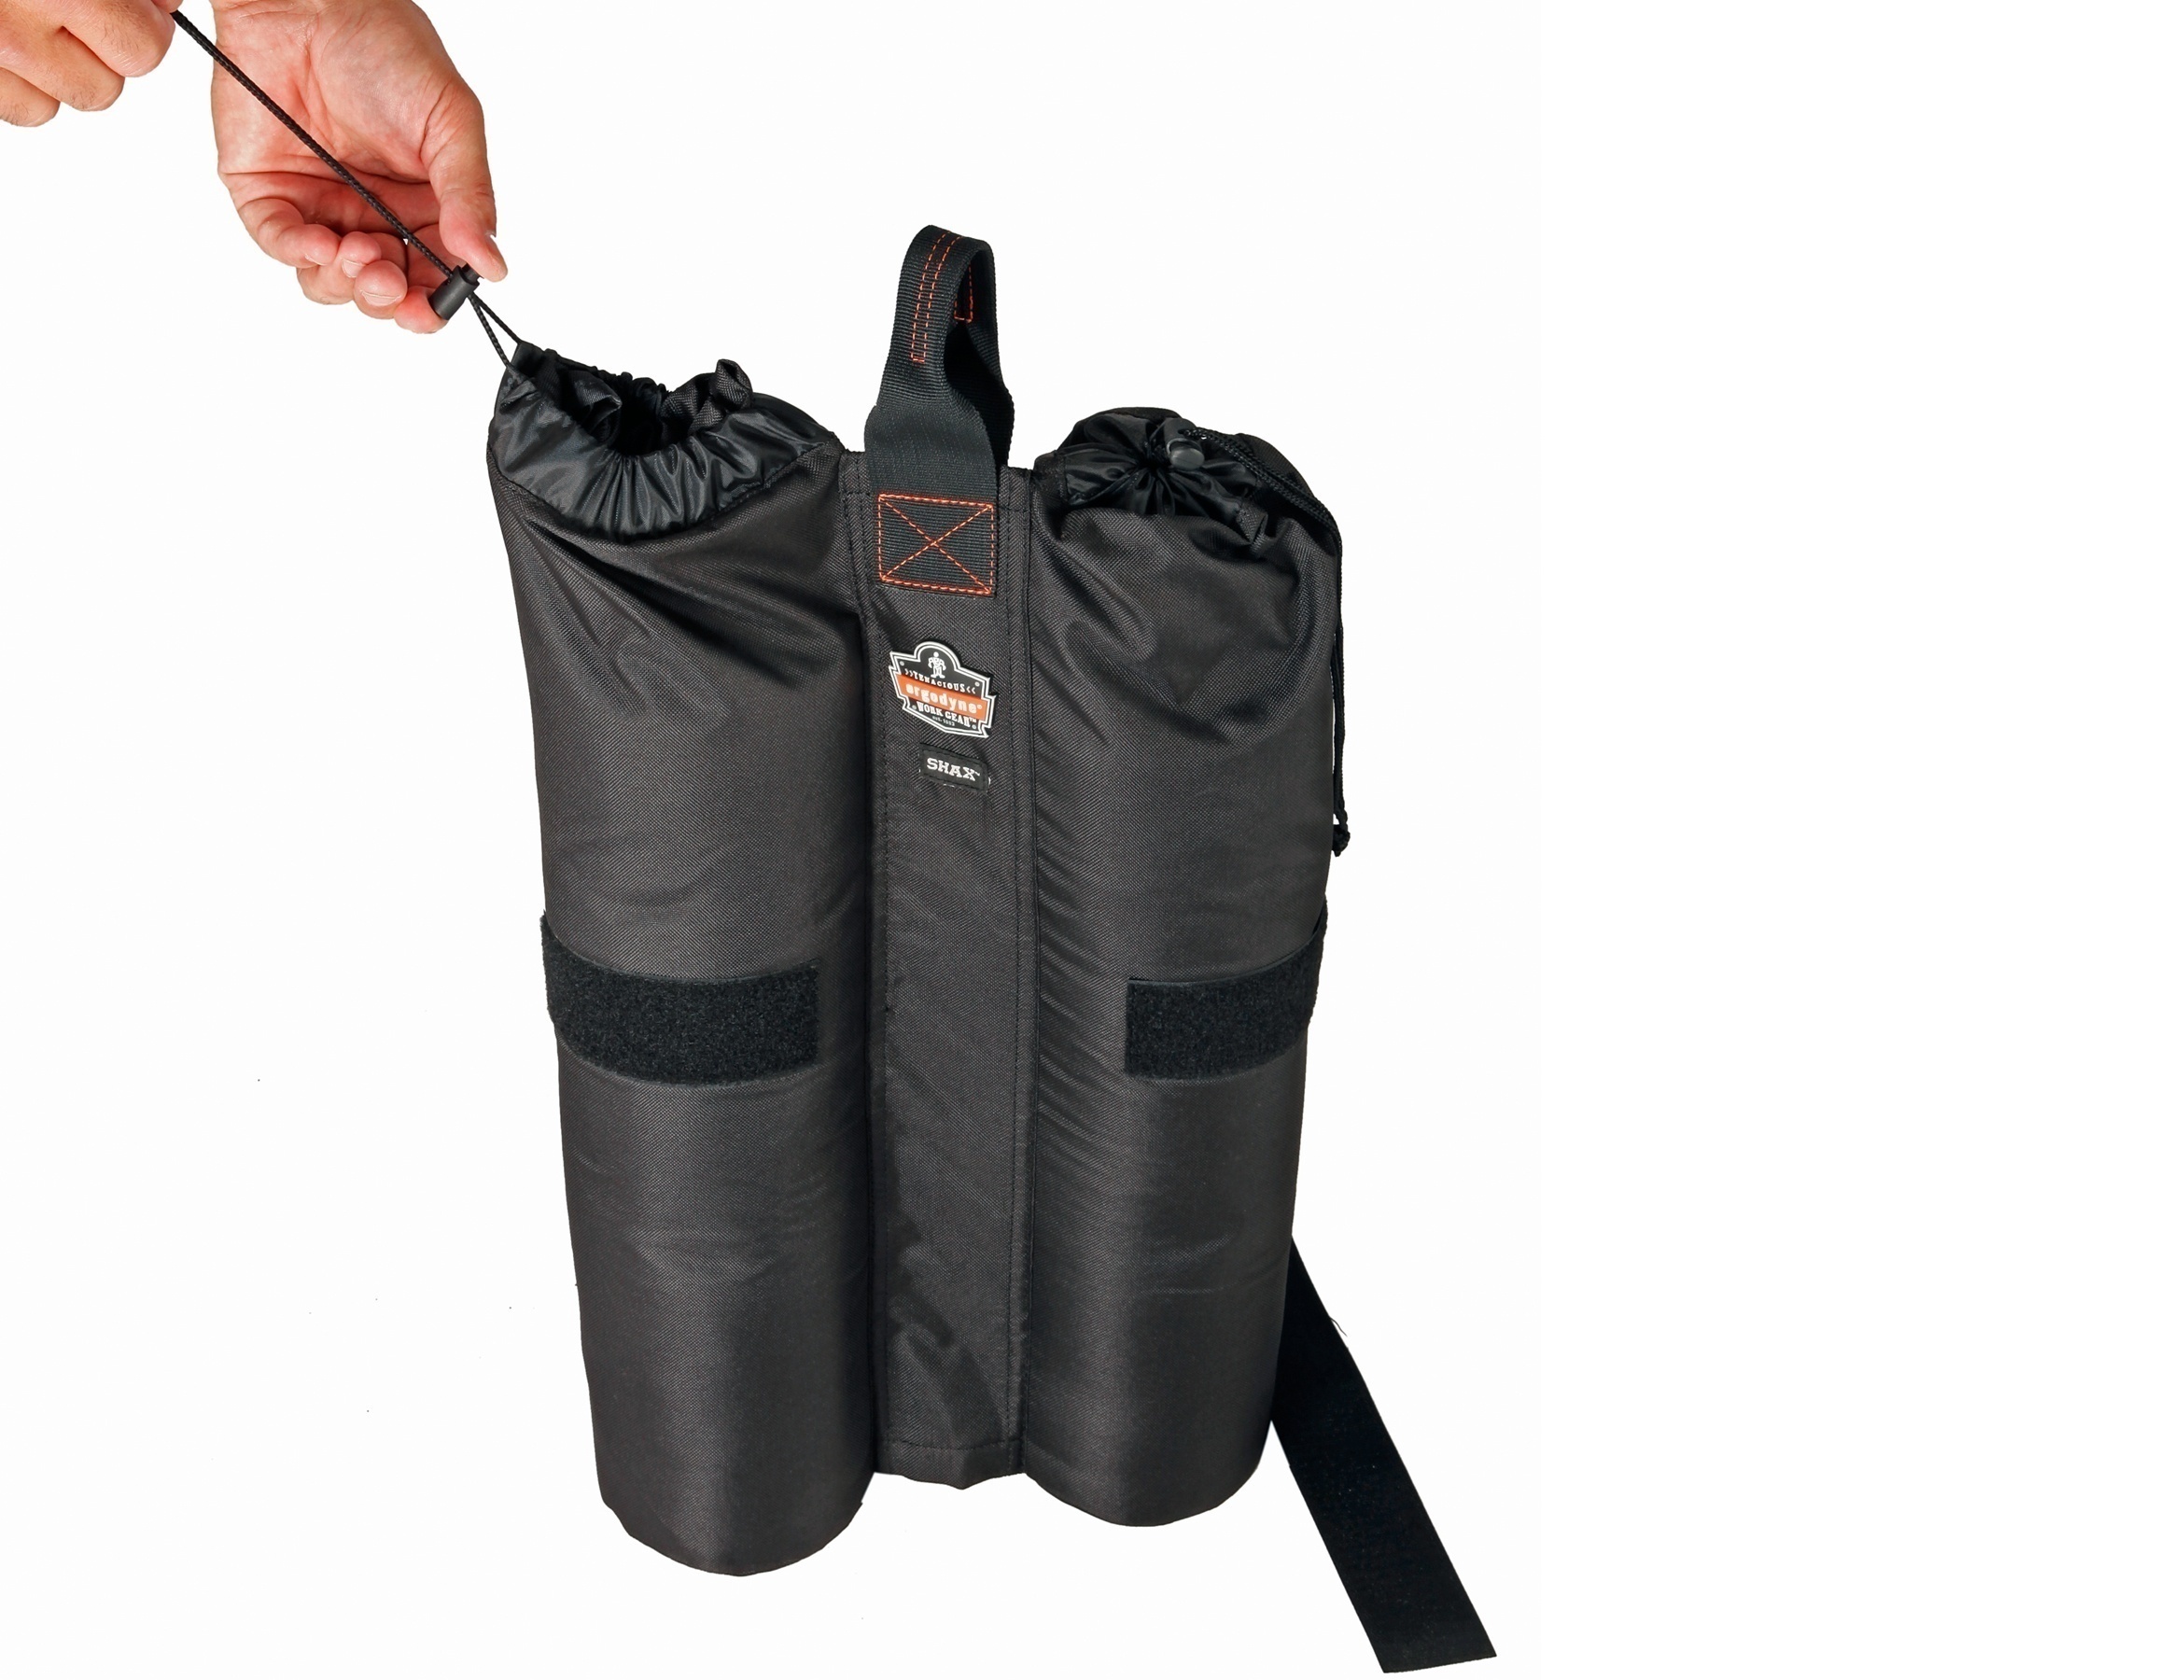 Ergodyne 6094 Shax Tent Weight Bags - Set of 2 from Columbia Safety